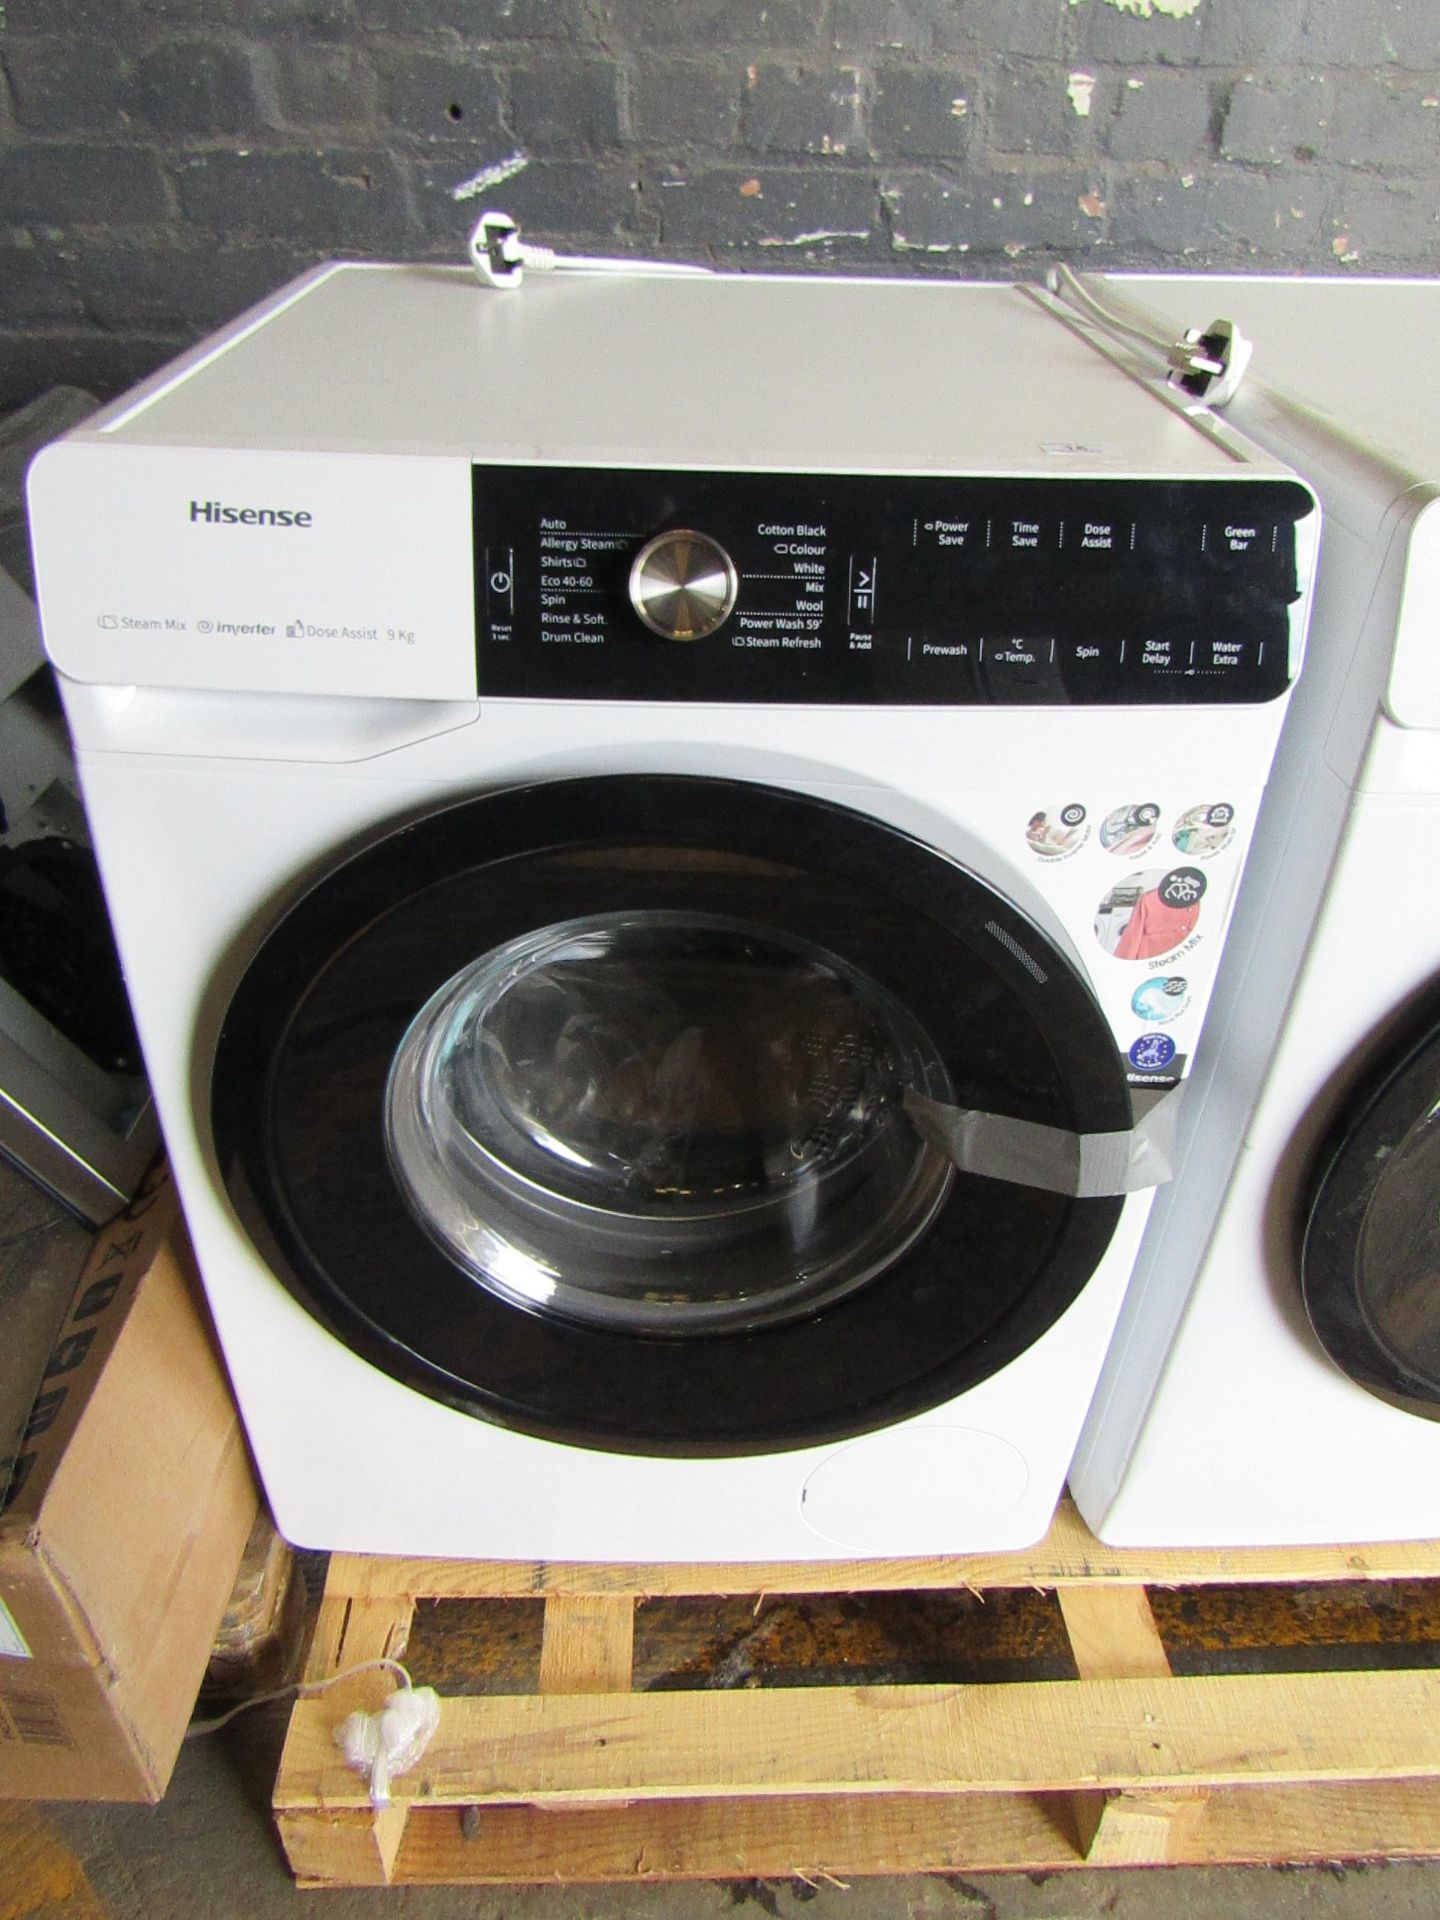 Hisense 9Kg Steam mix washing machine with Dose Assist, powers on but appears to have a faulty